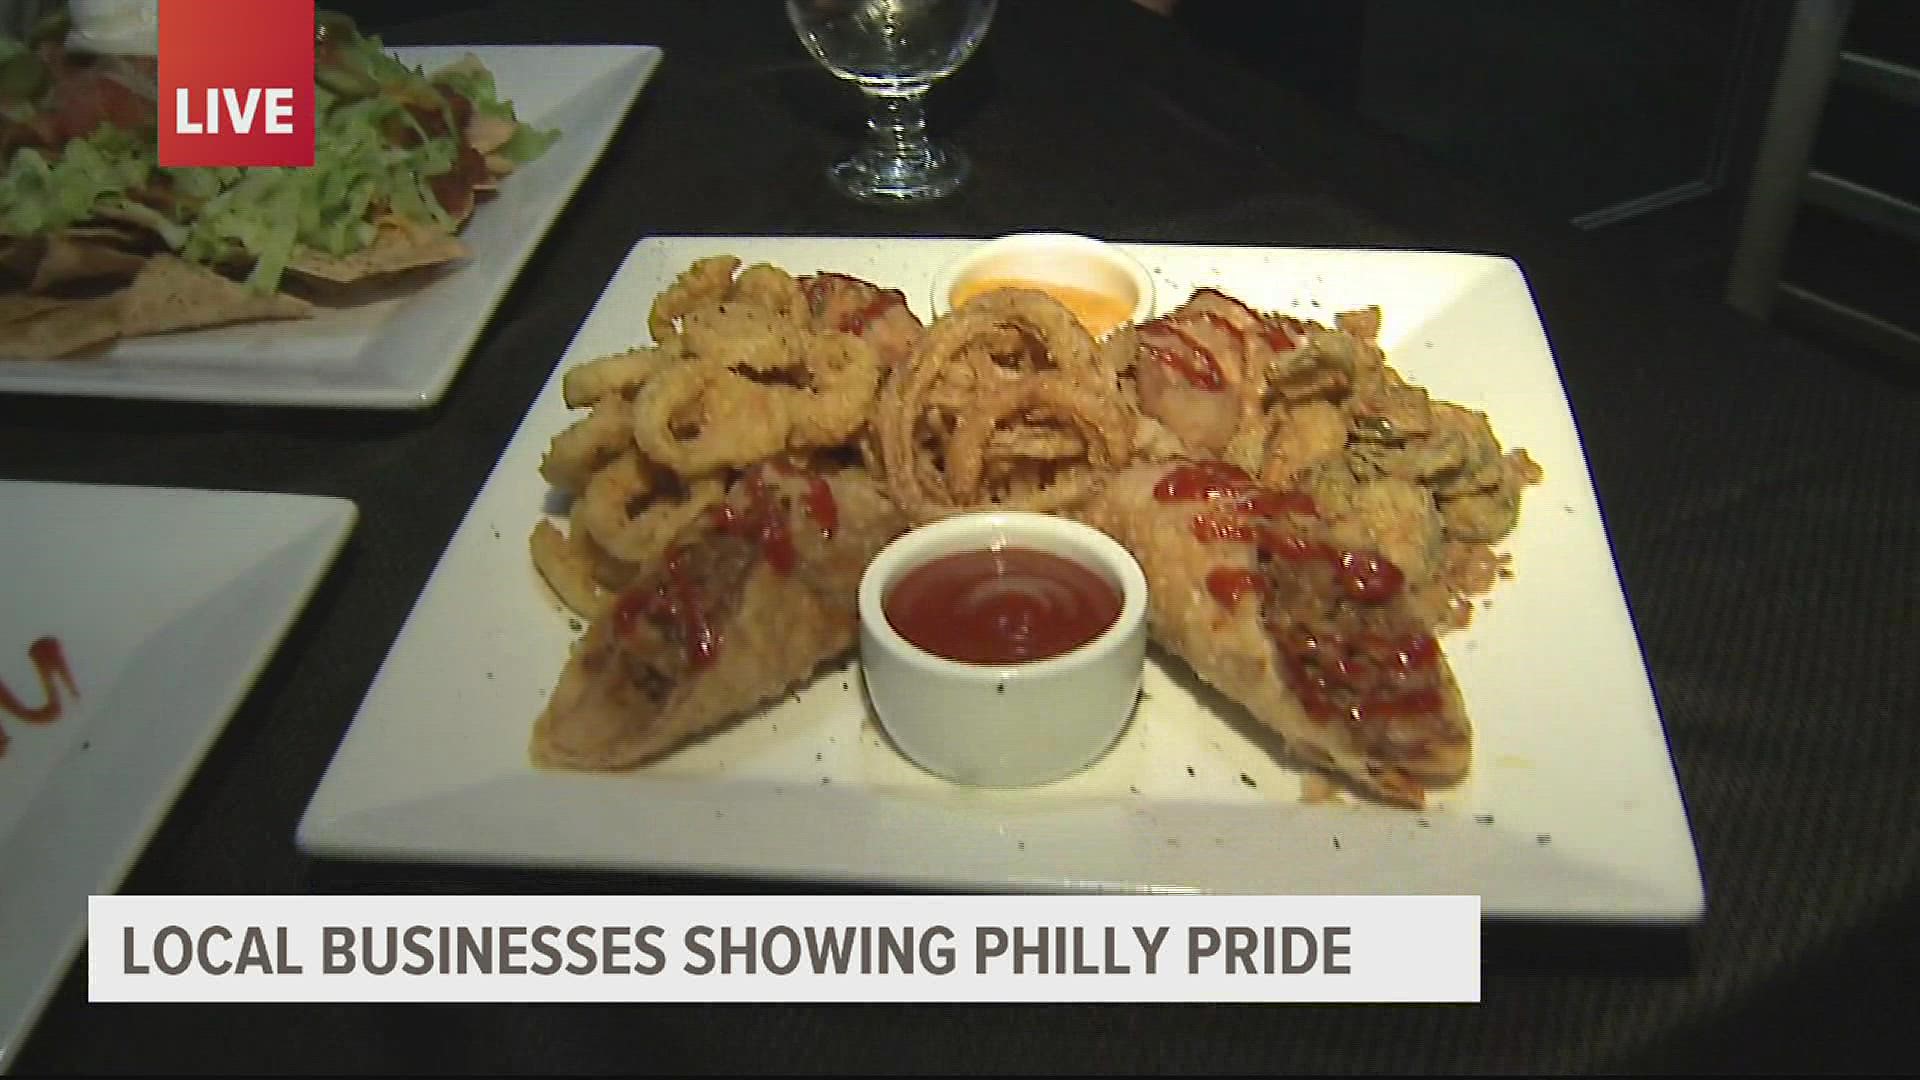 Alleyoops Sports Bar and Grill and Suburban Bowlerama is offering Phillies-inspired food and drinks.